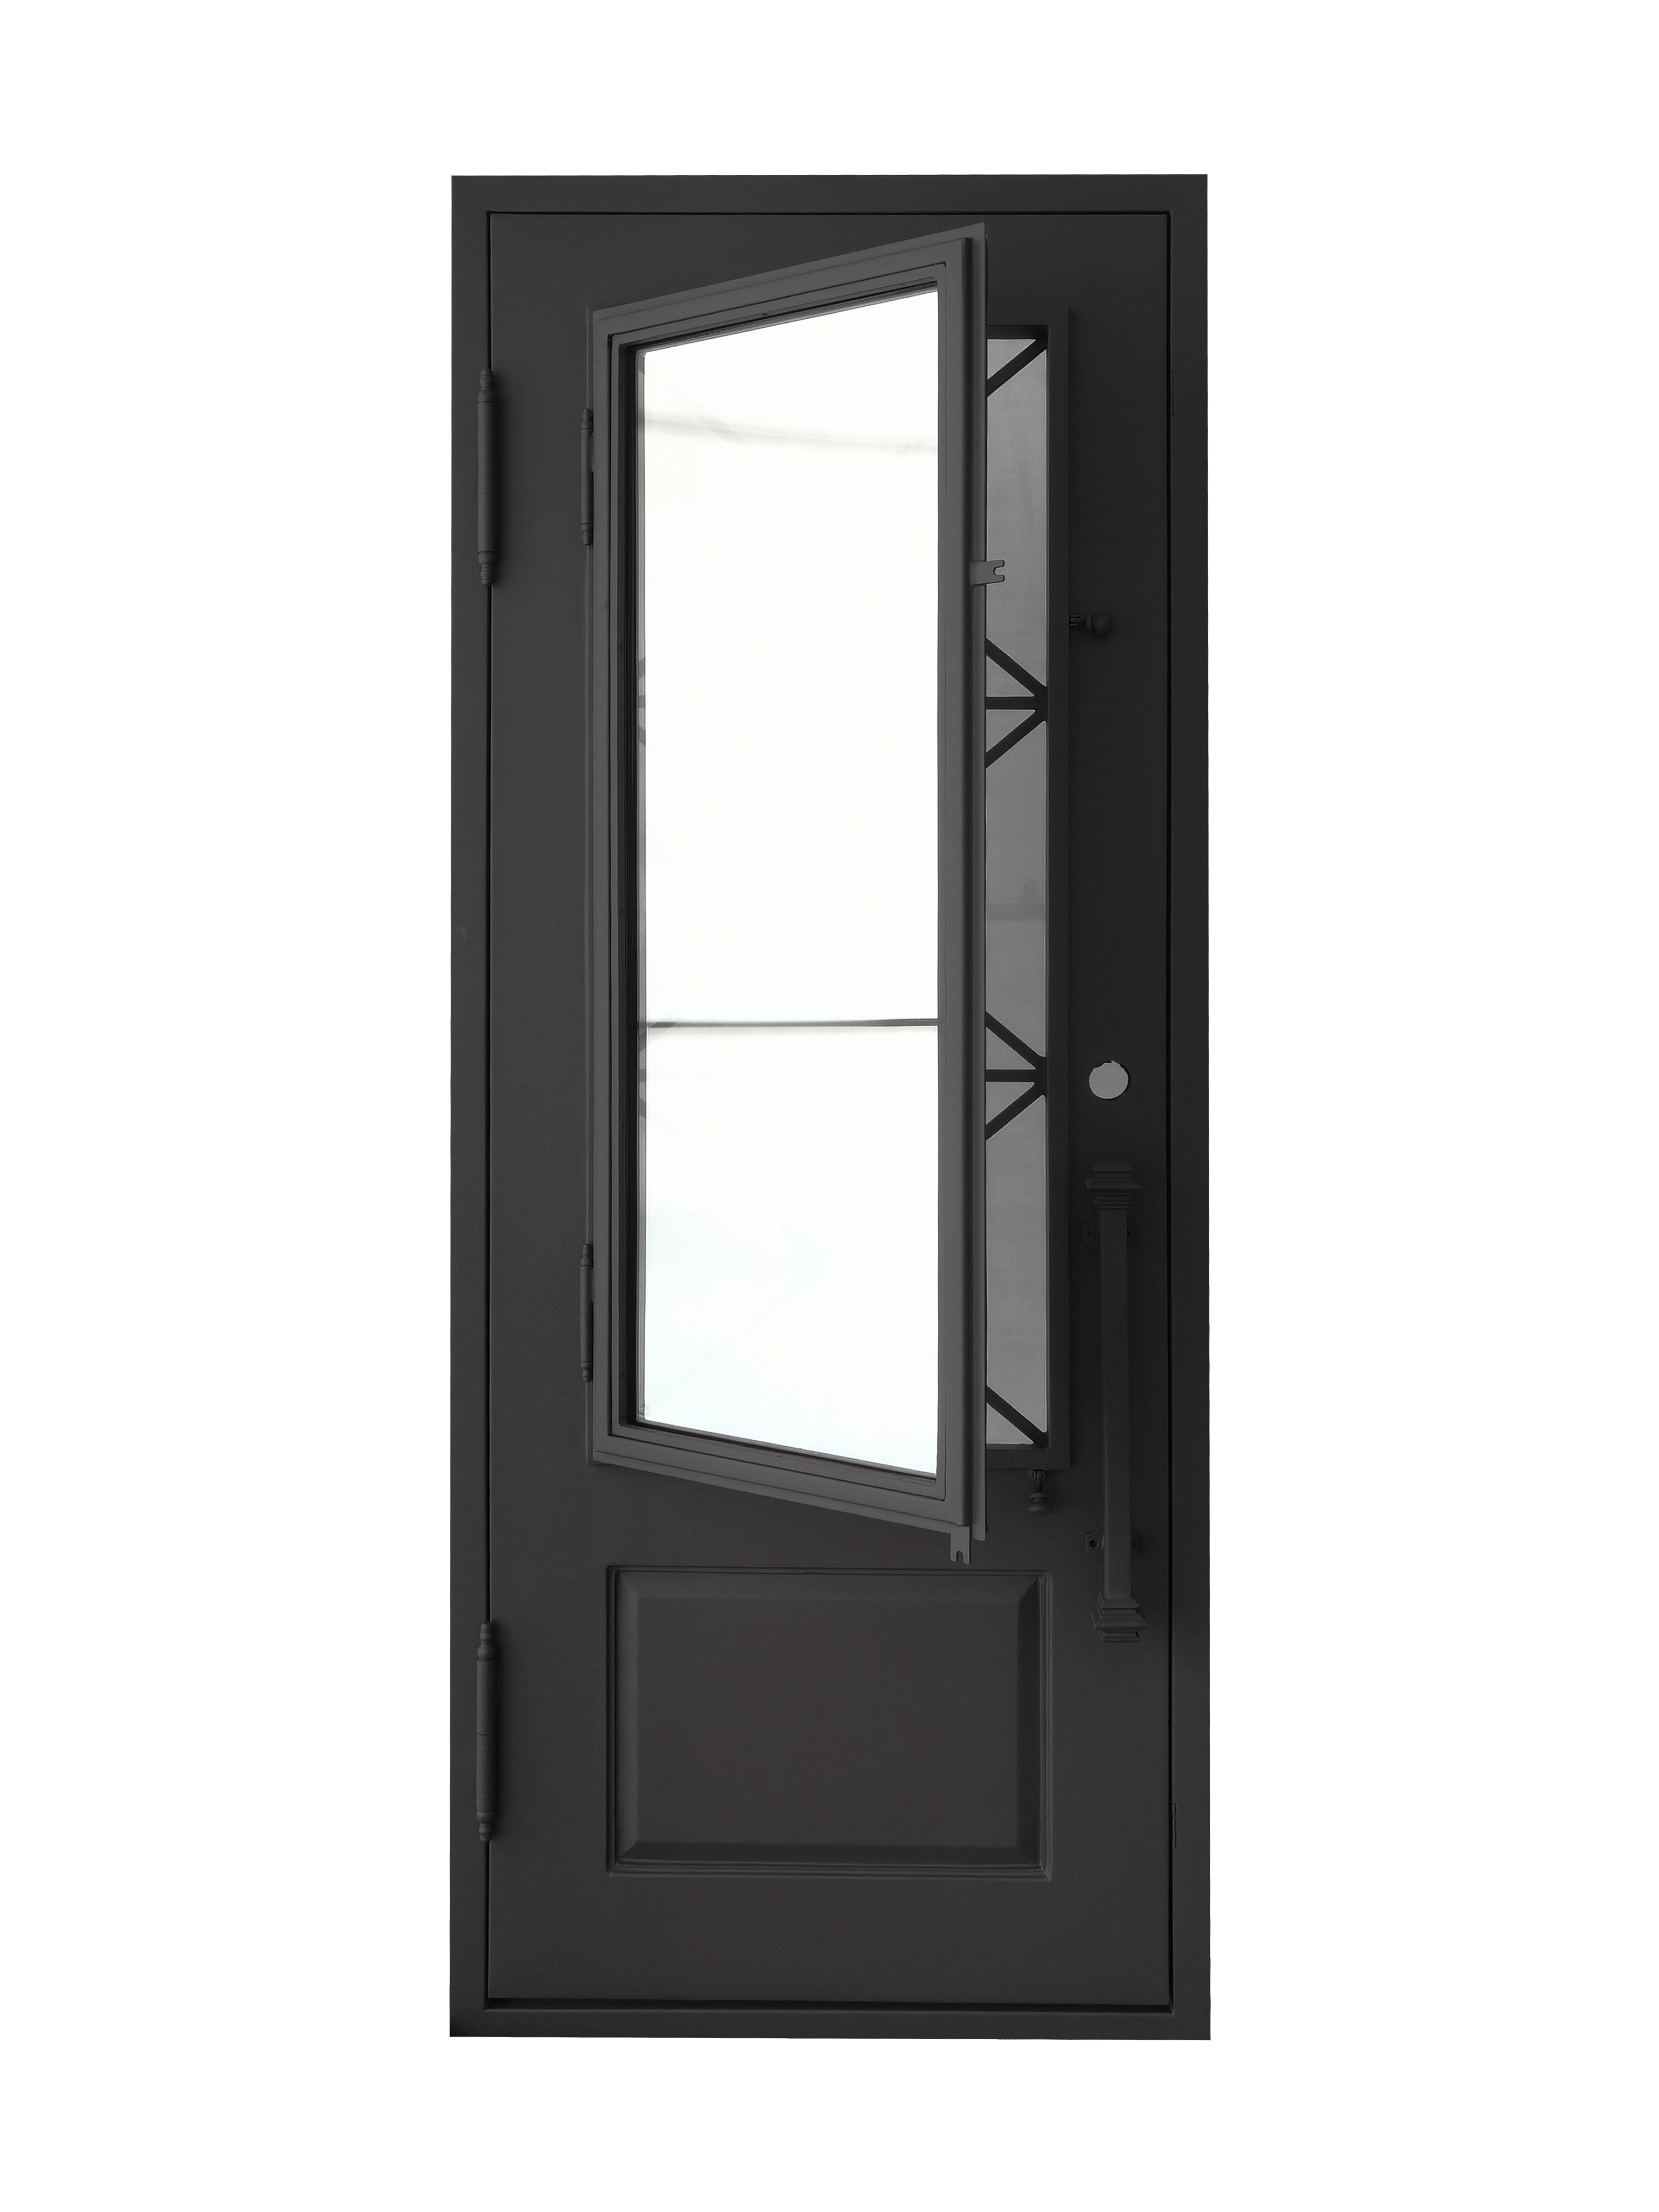 Rockport Model Pre Hung Single Front Entry Wrought Iron Door With Reflective Glass Matt Black Finish